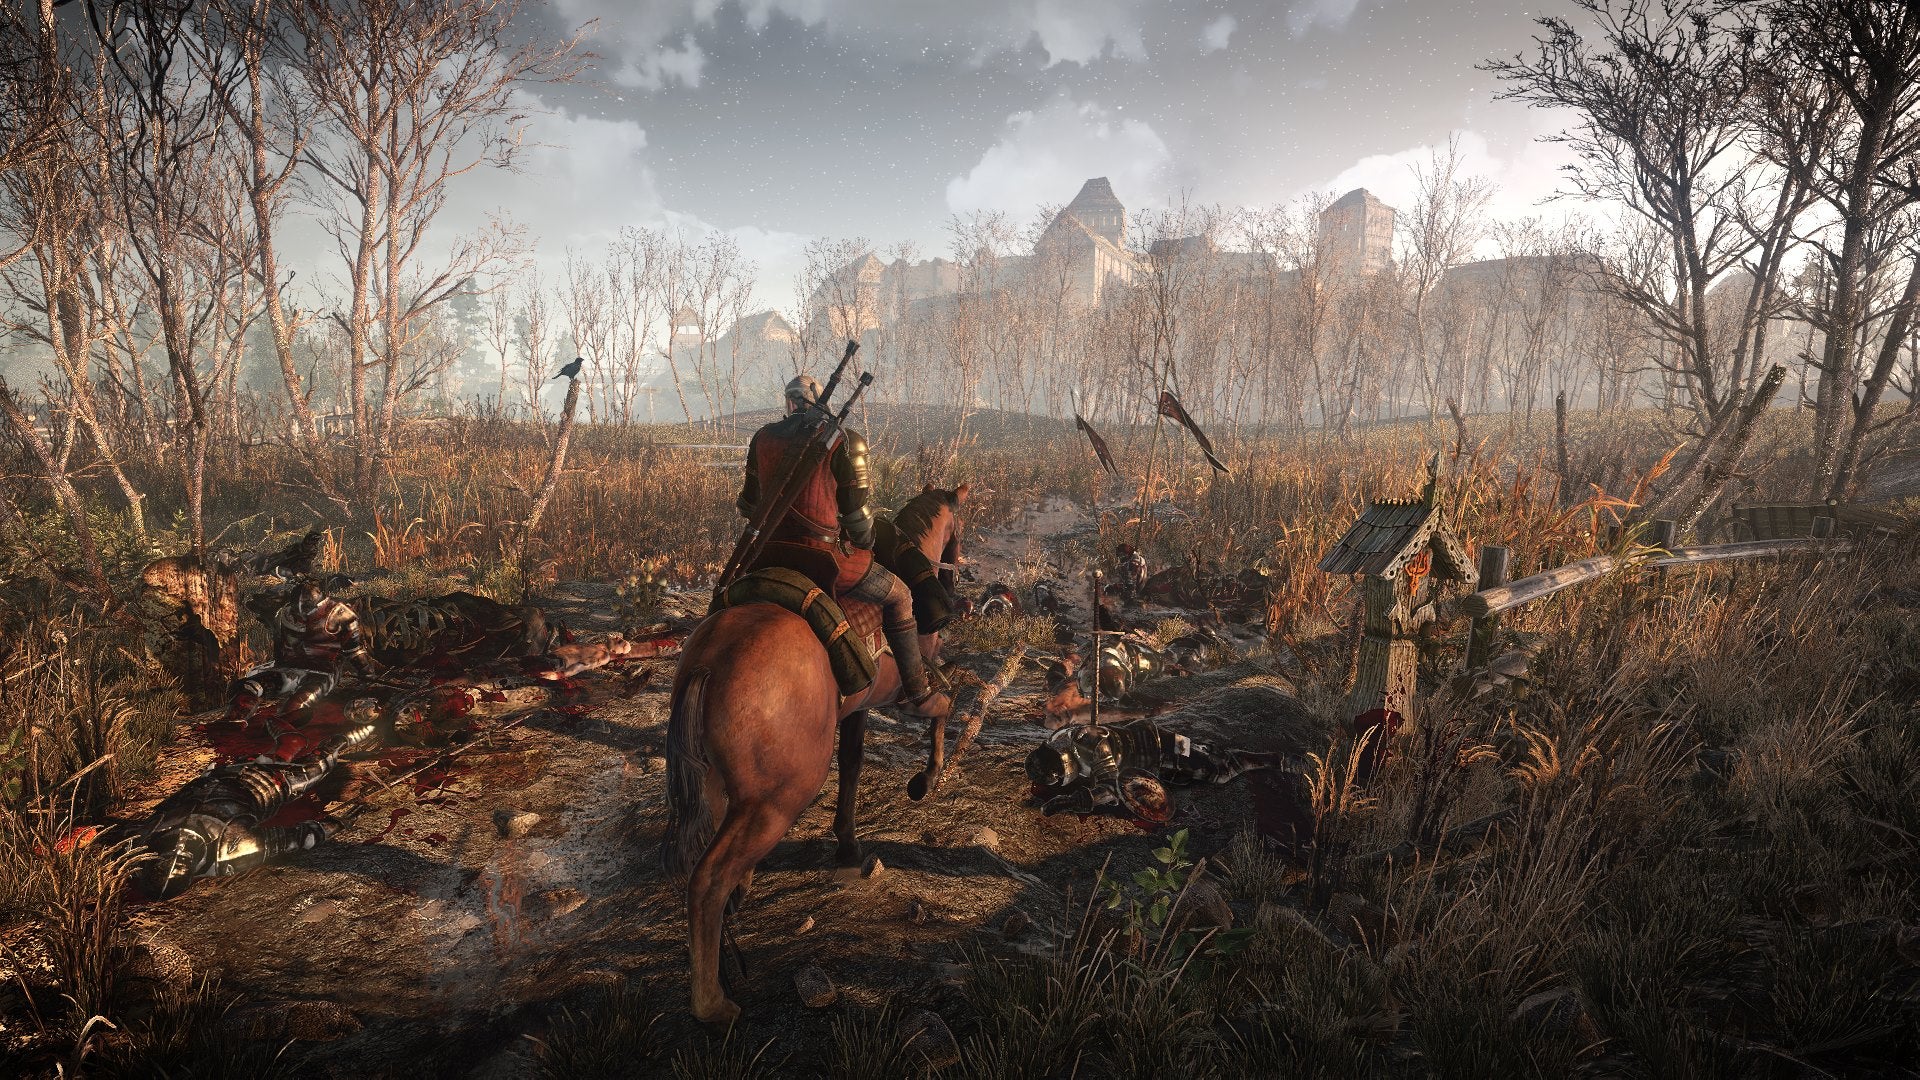 Geralt rides Roach through woods and corpses